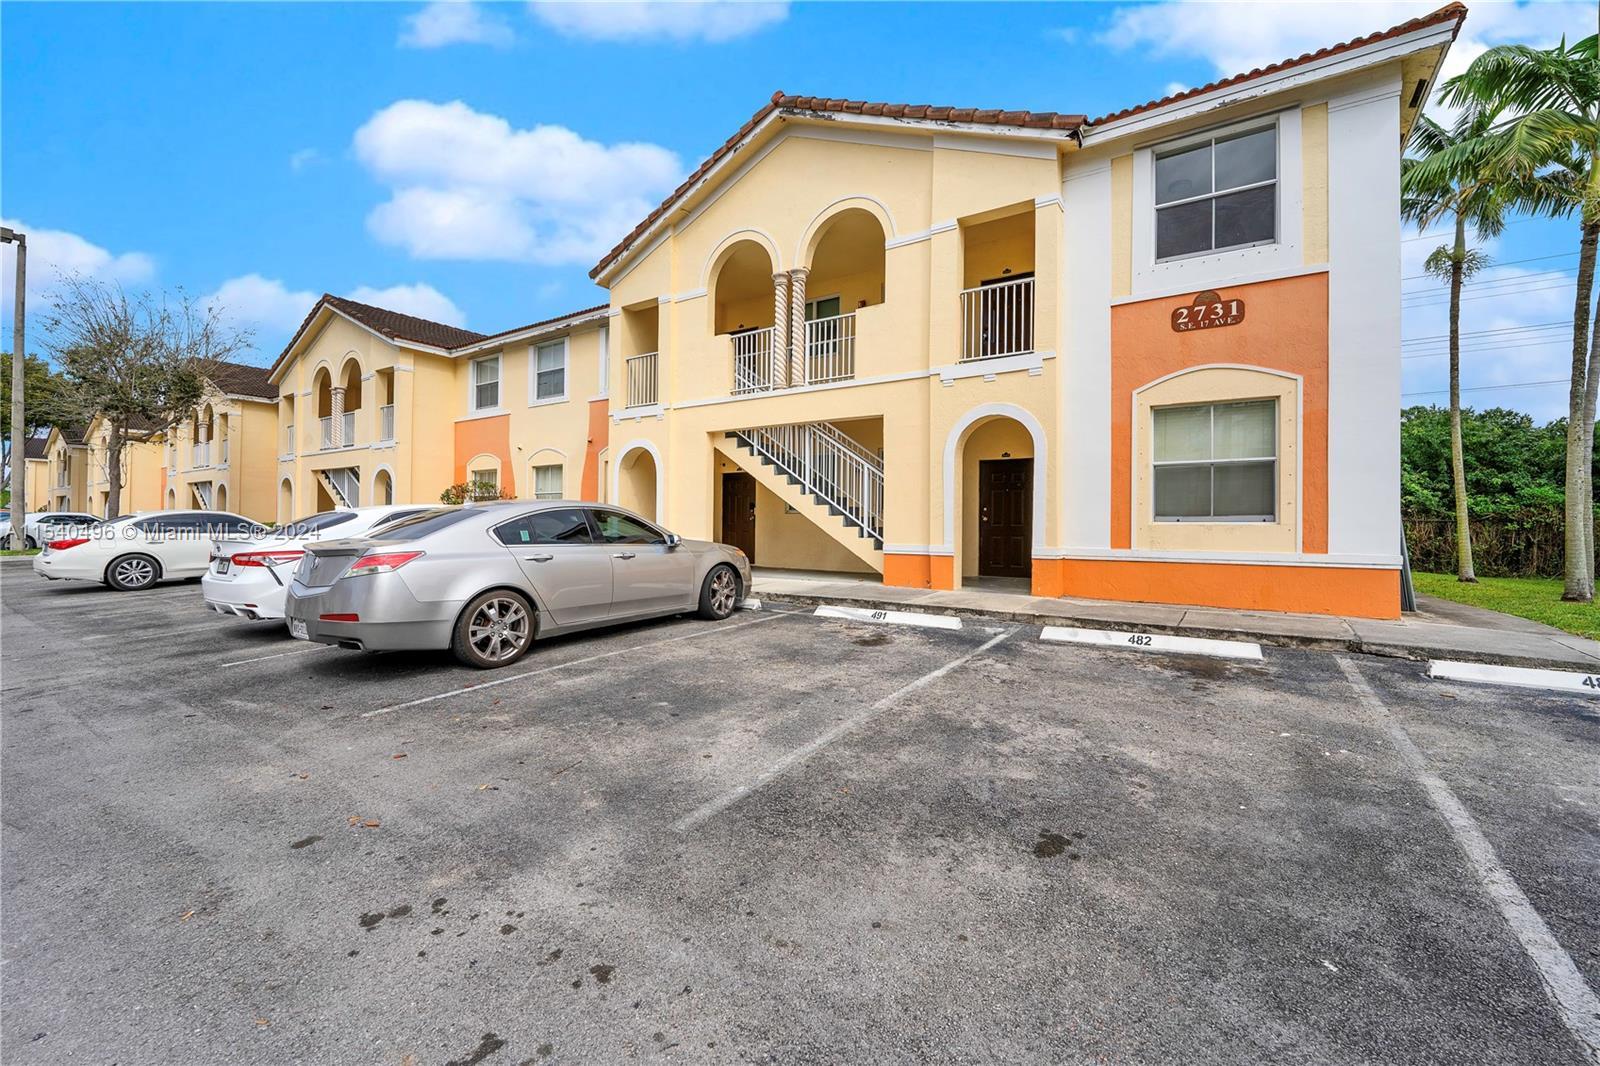 Photo of 2731 SE 17th Ave #211 in Homestead, FL